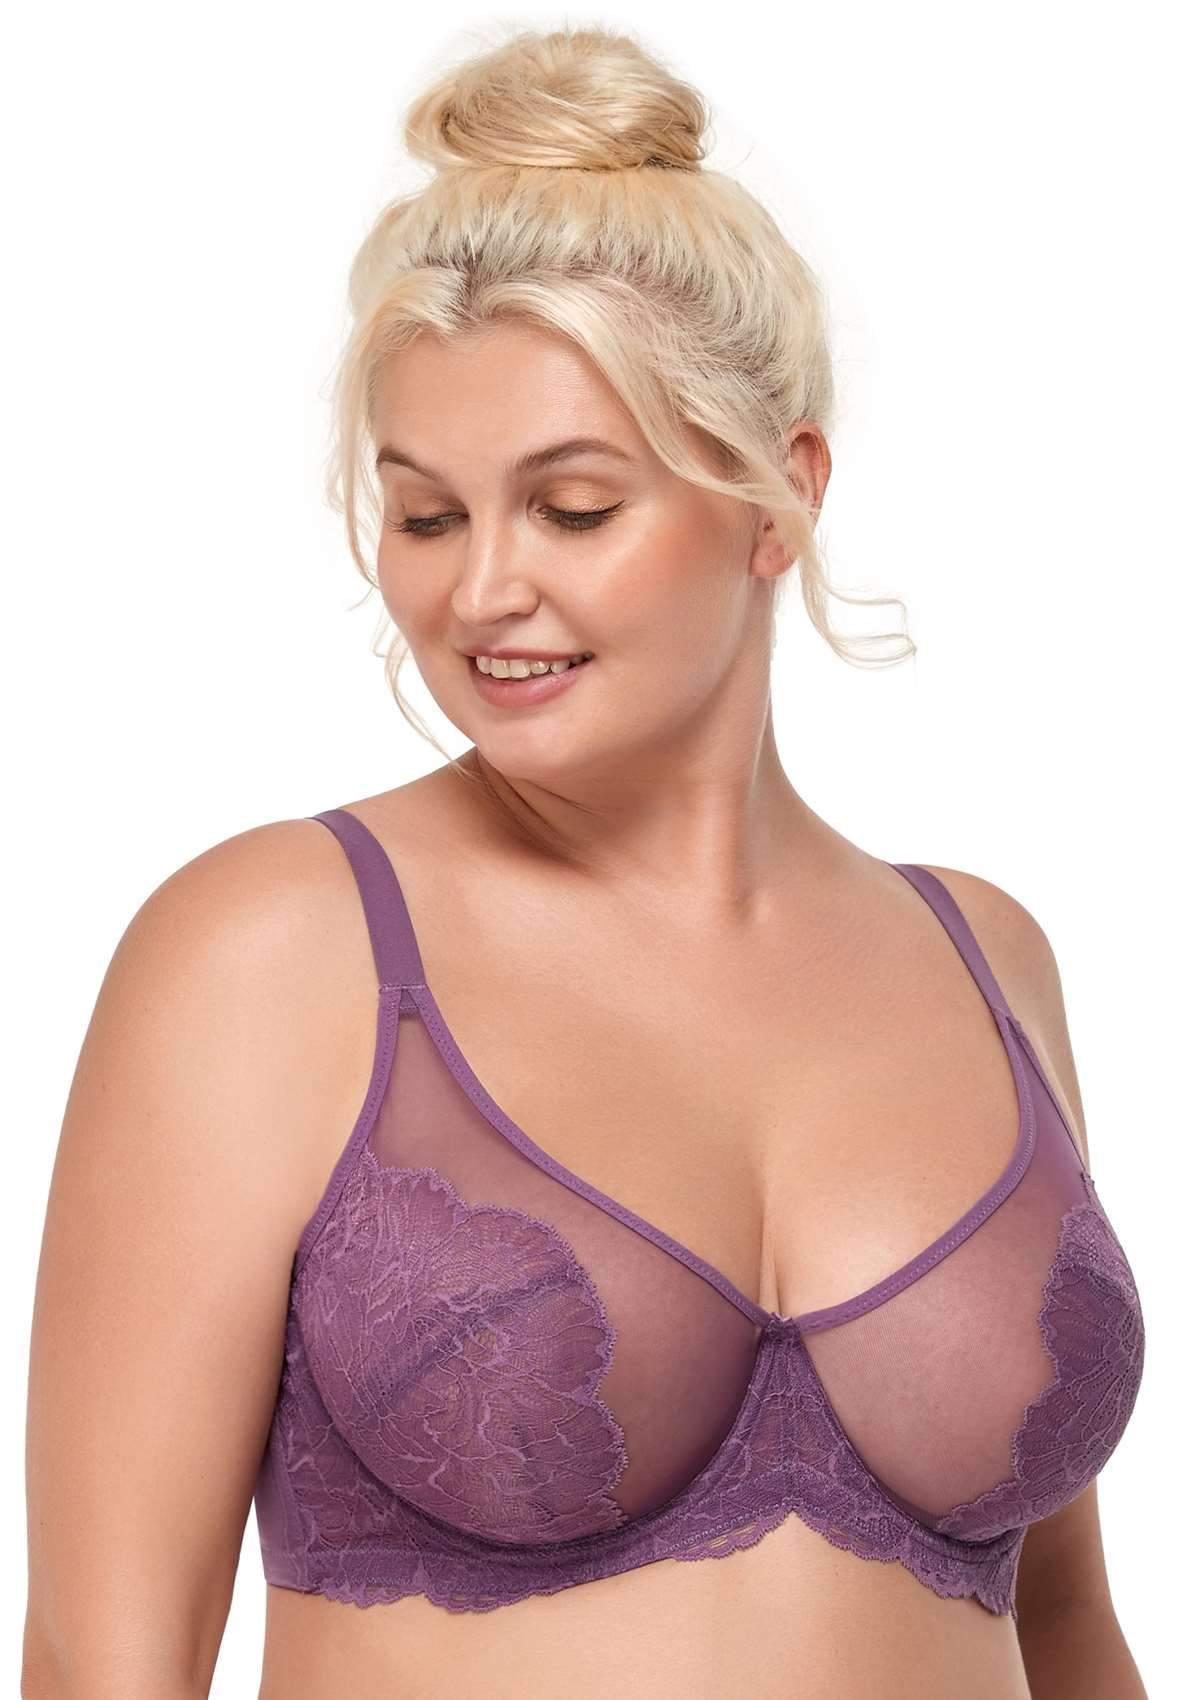 HSIA Blossom Transparent Lace Bra: Plus Size Wired Back Smoothing Bra - Purple / 40 / C